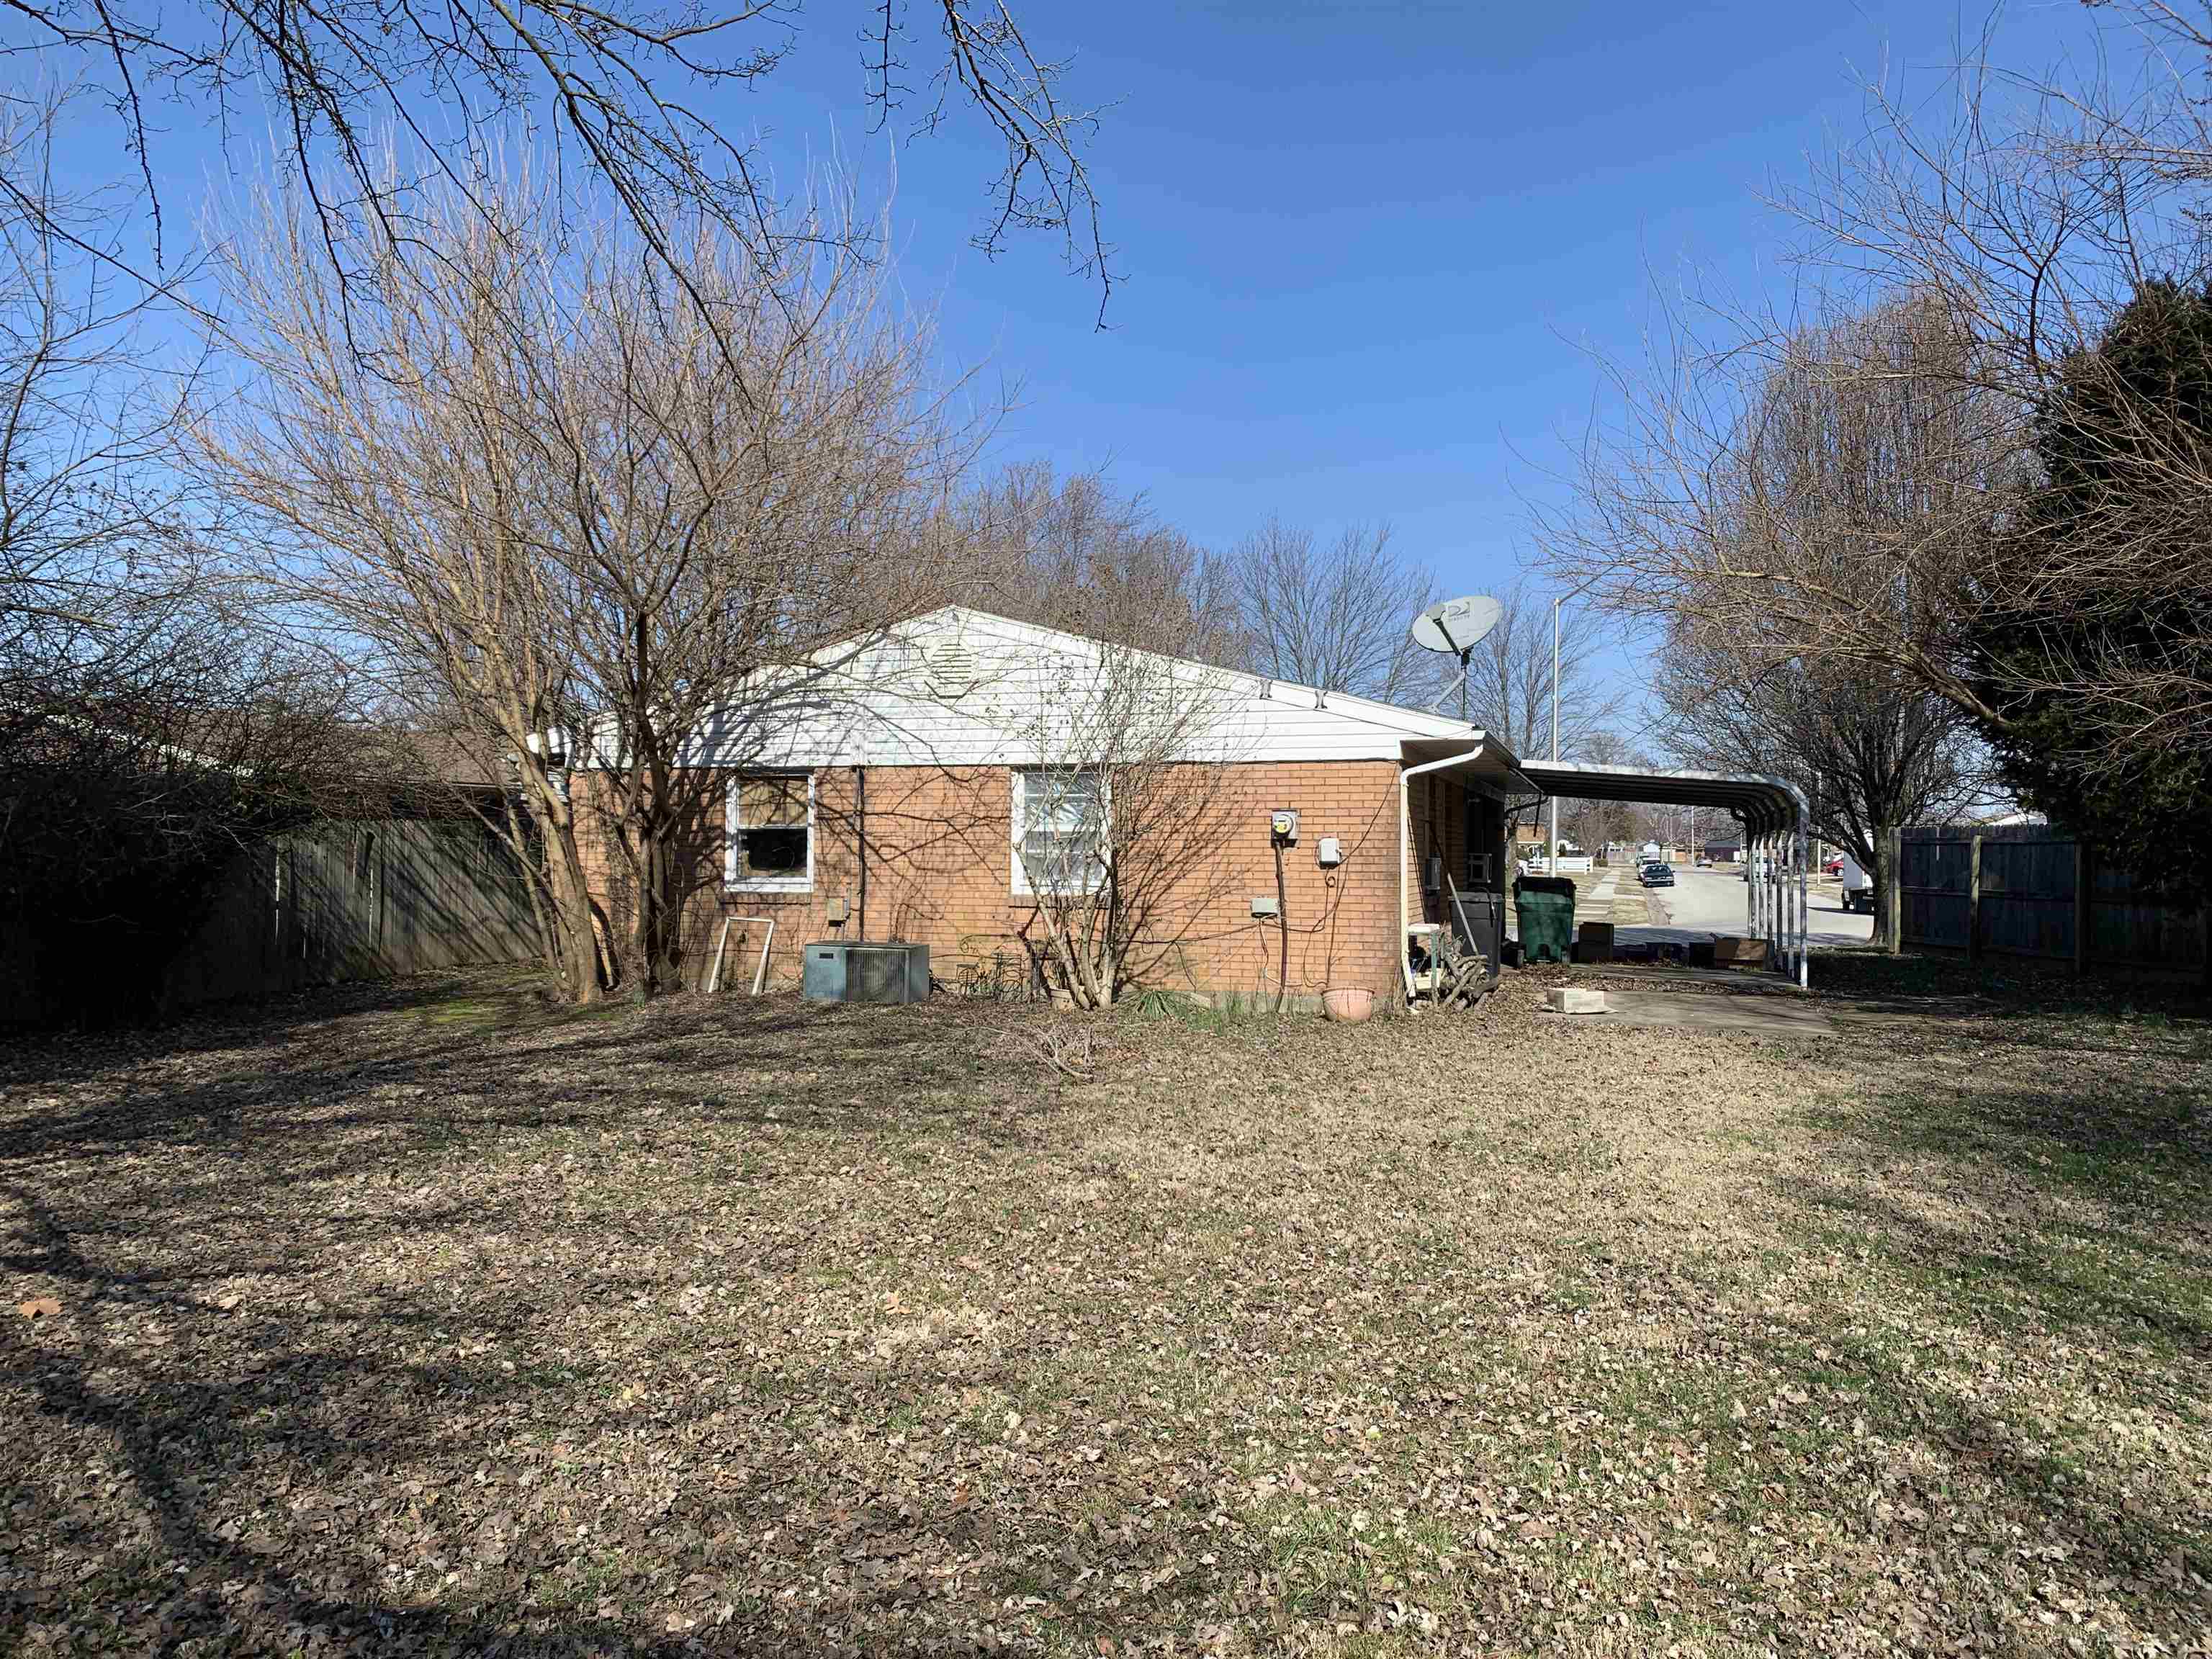 2106 Lovell Drive, Owensboro, Kentucky 42301, 3 Bedrooms Bedrooms, ,1 BathroomBathrooms,Single Family Residence,For Sale,Lovell Drive,88971